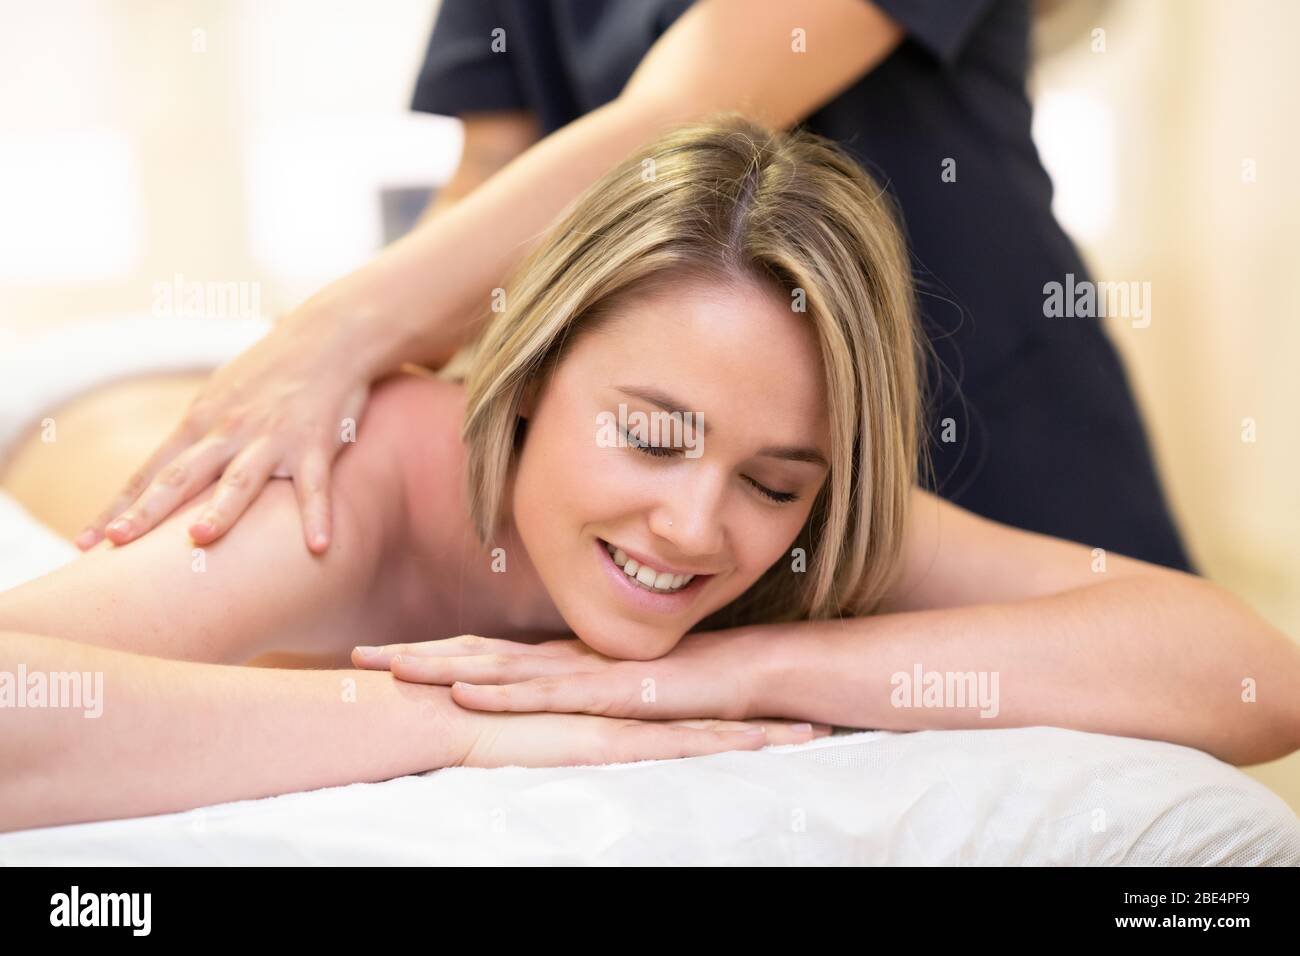 Woman lying on a stretcher receiving a back massage. Stock Photo